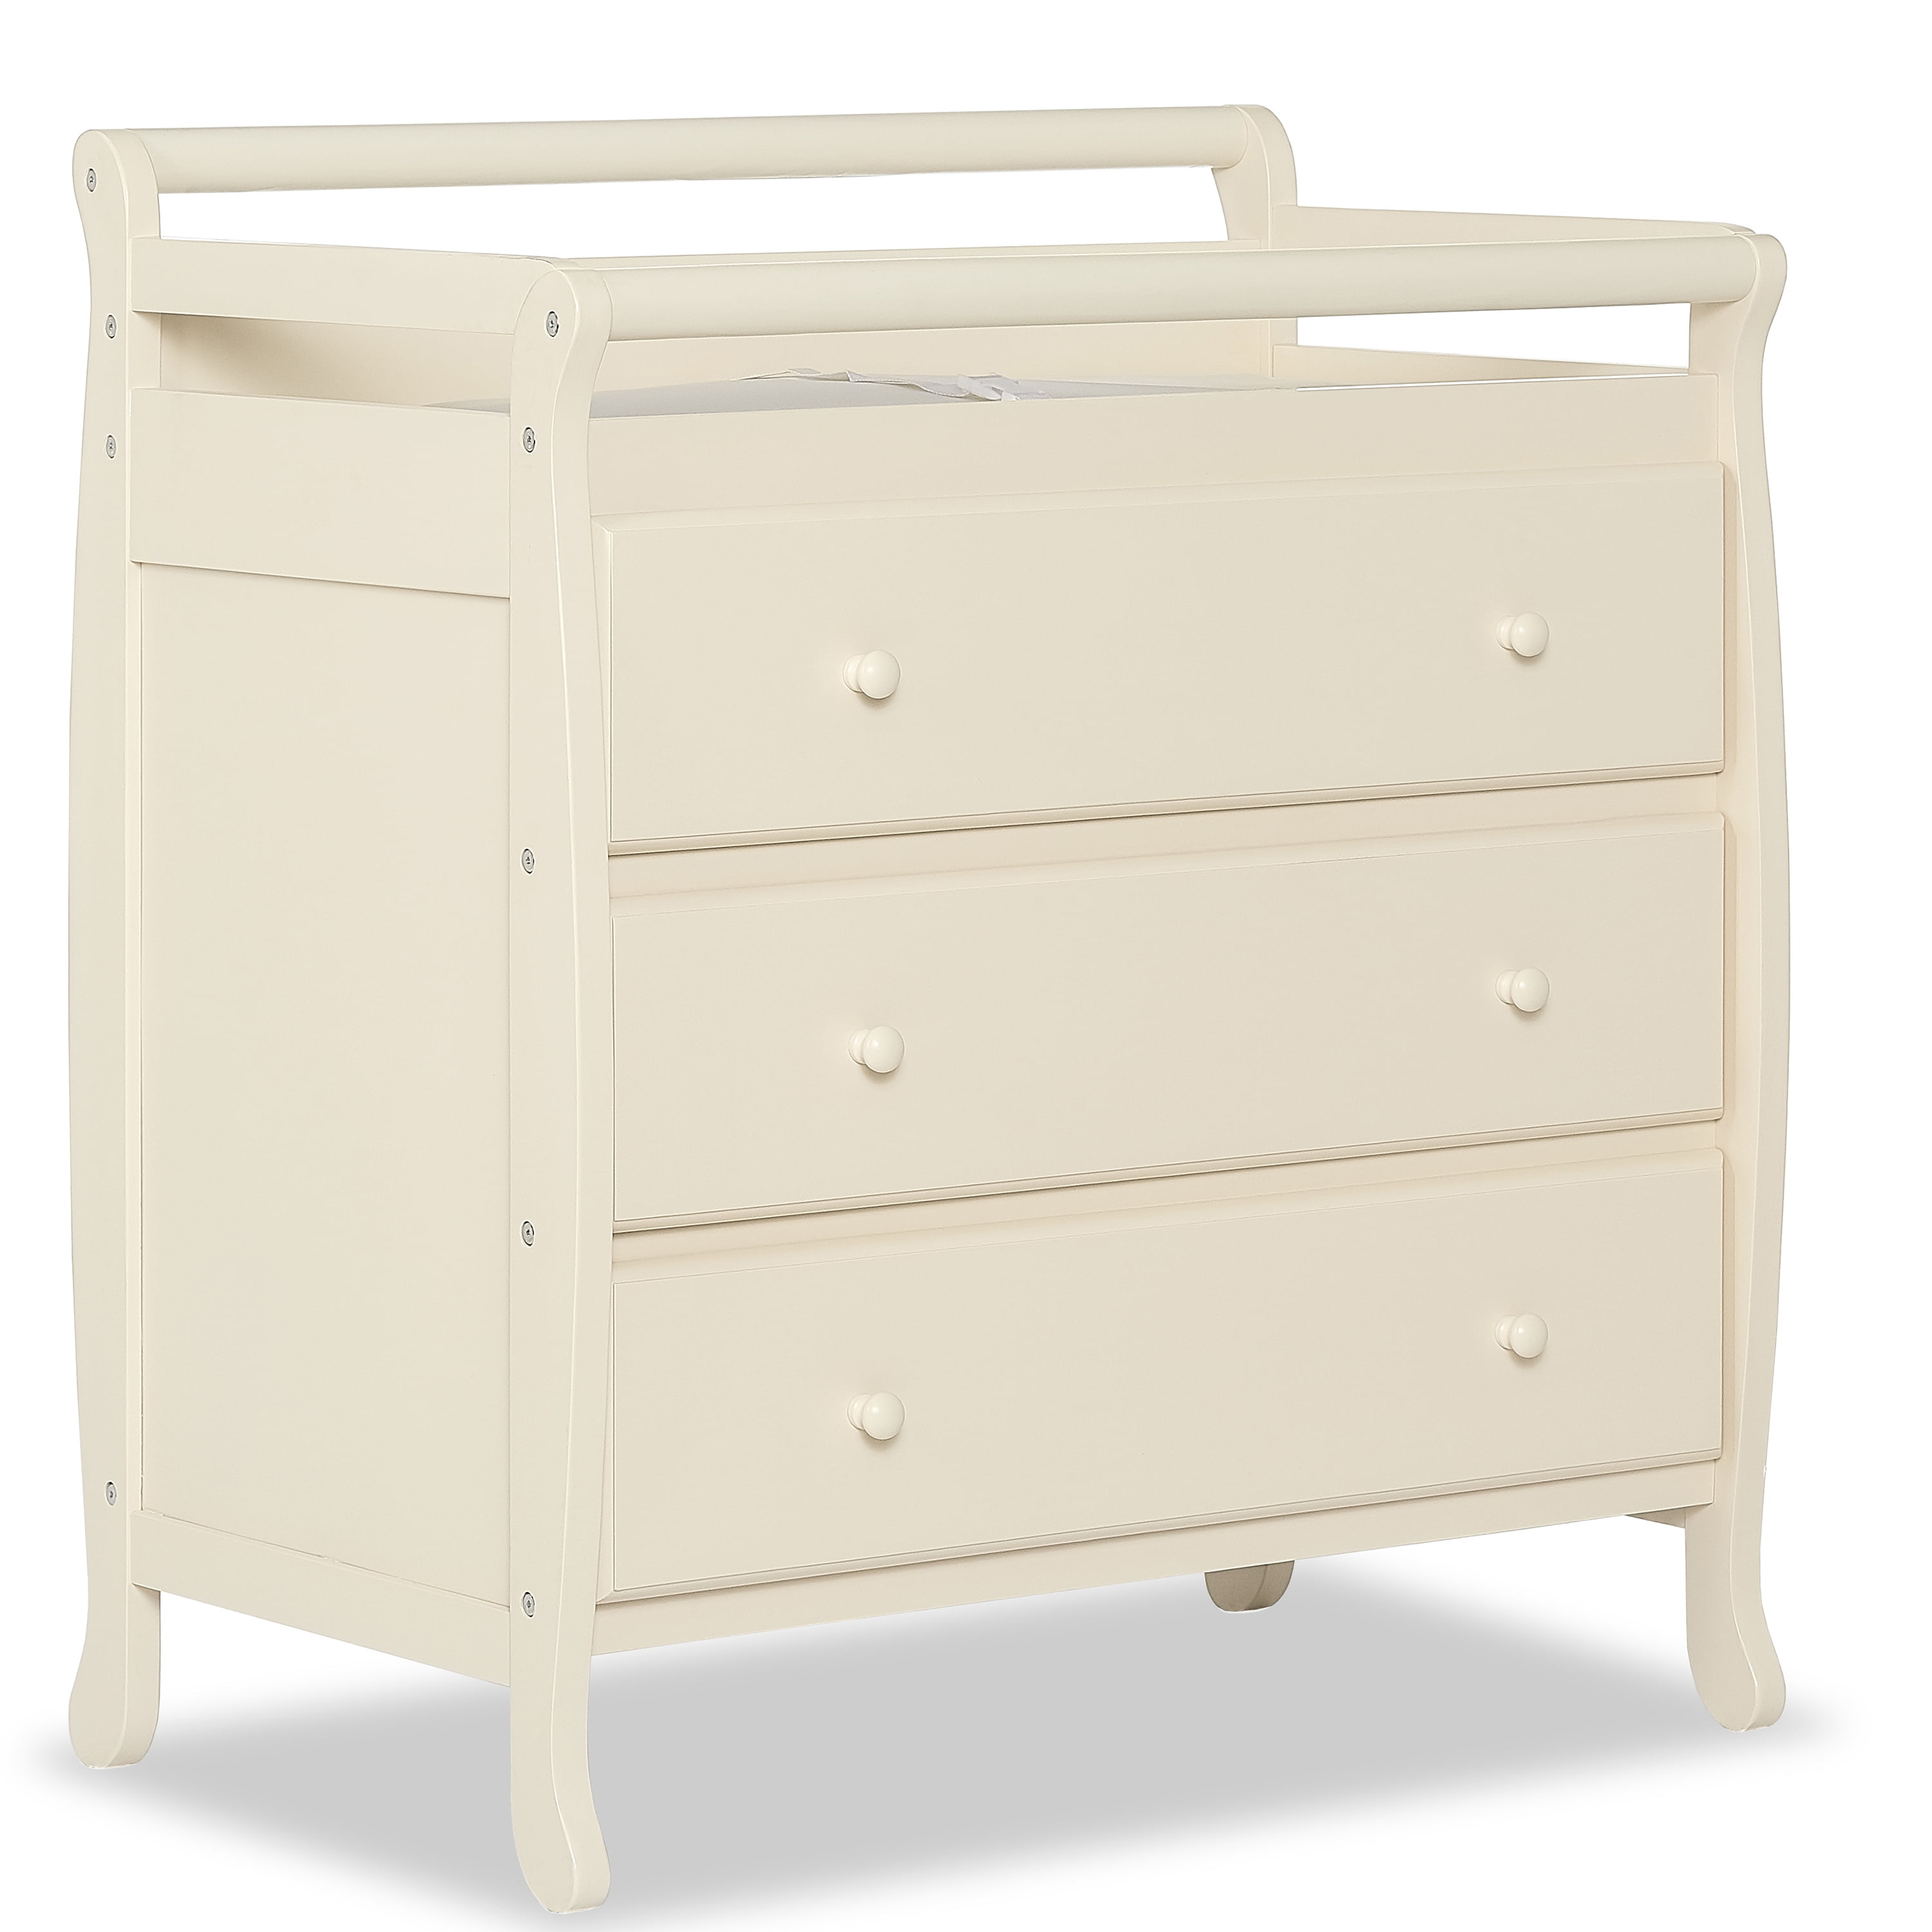 Dream On Me Liberty 3 Drawer Changing Table With Pad Mystic Grey